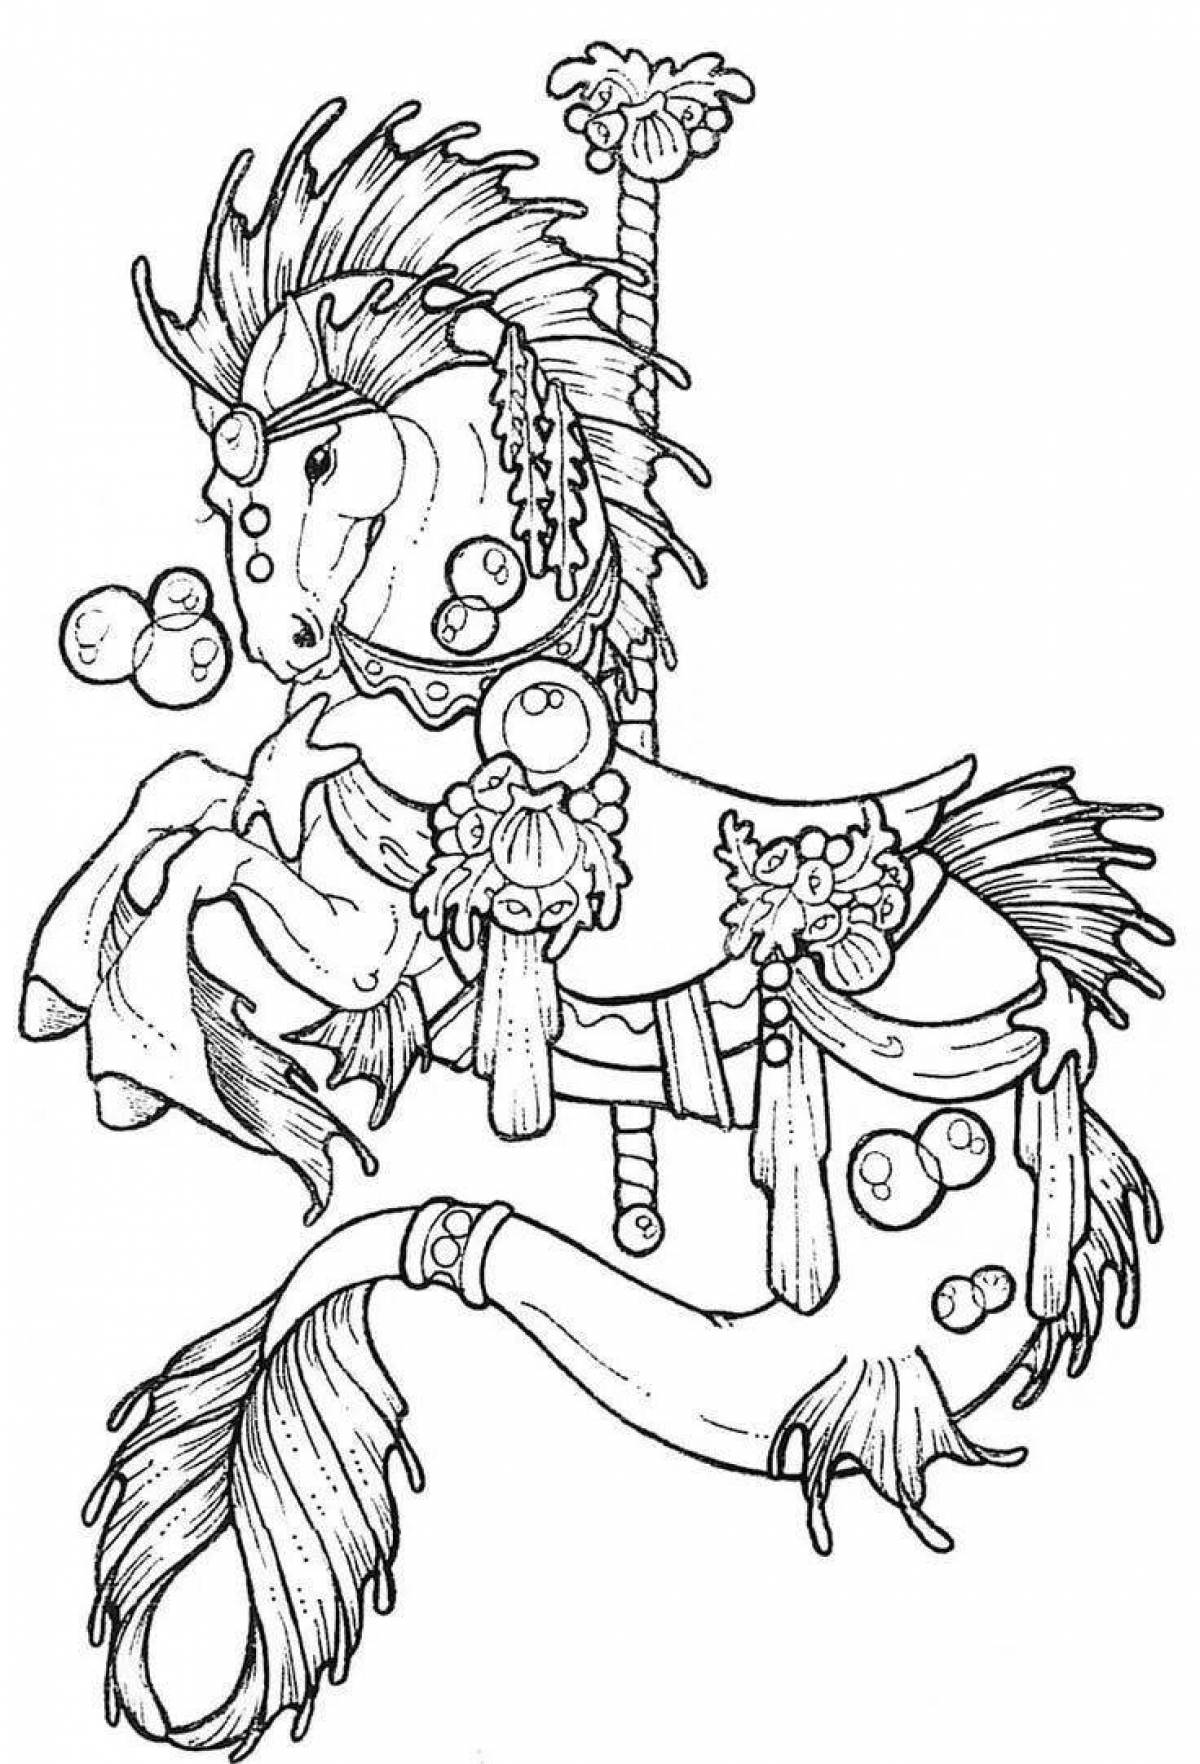 Supernatural animal coloring pages